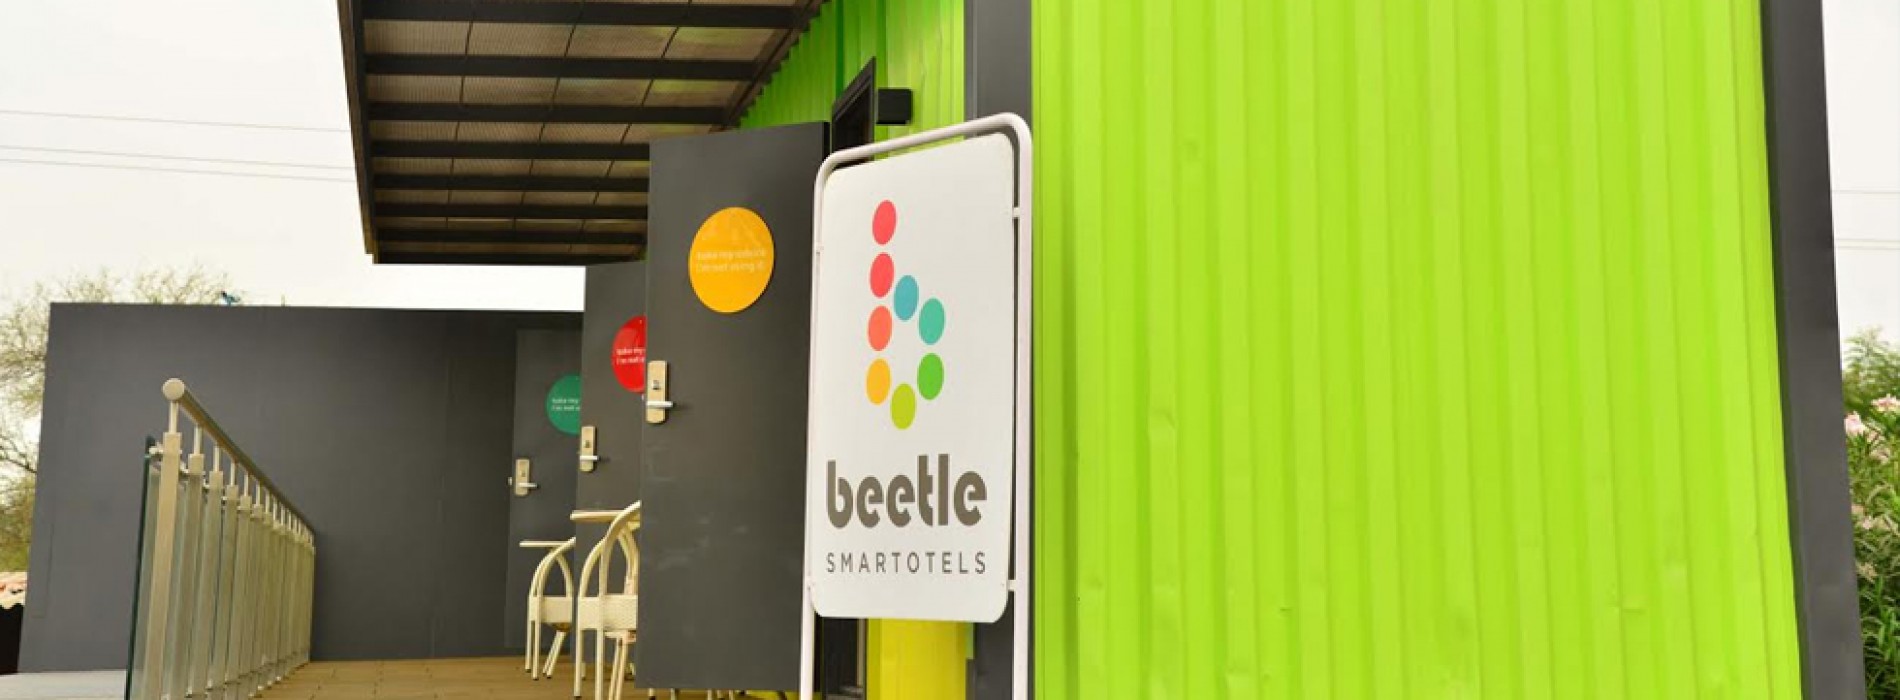 ‘Beetle Smartotels’ rolls out portable hotels ideal for remote locations and industry clusters